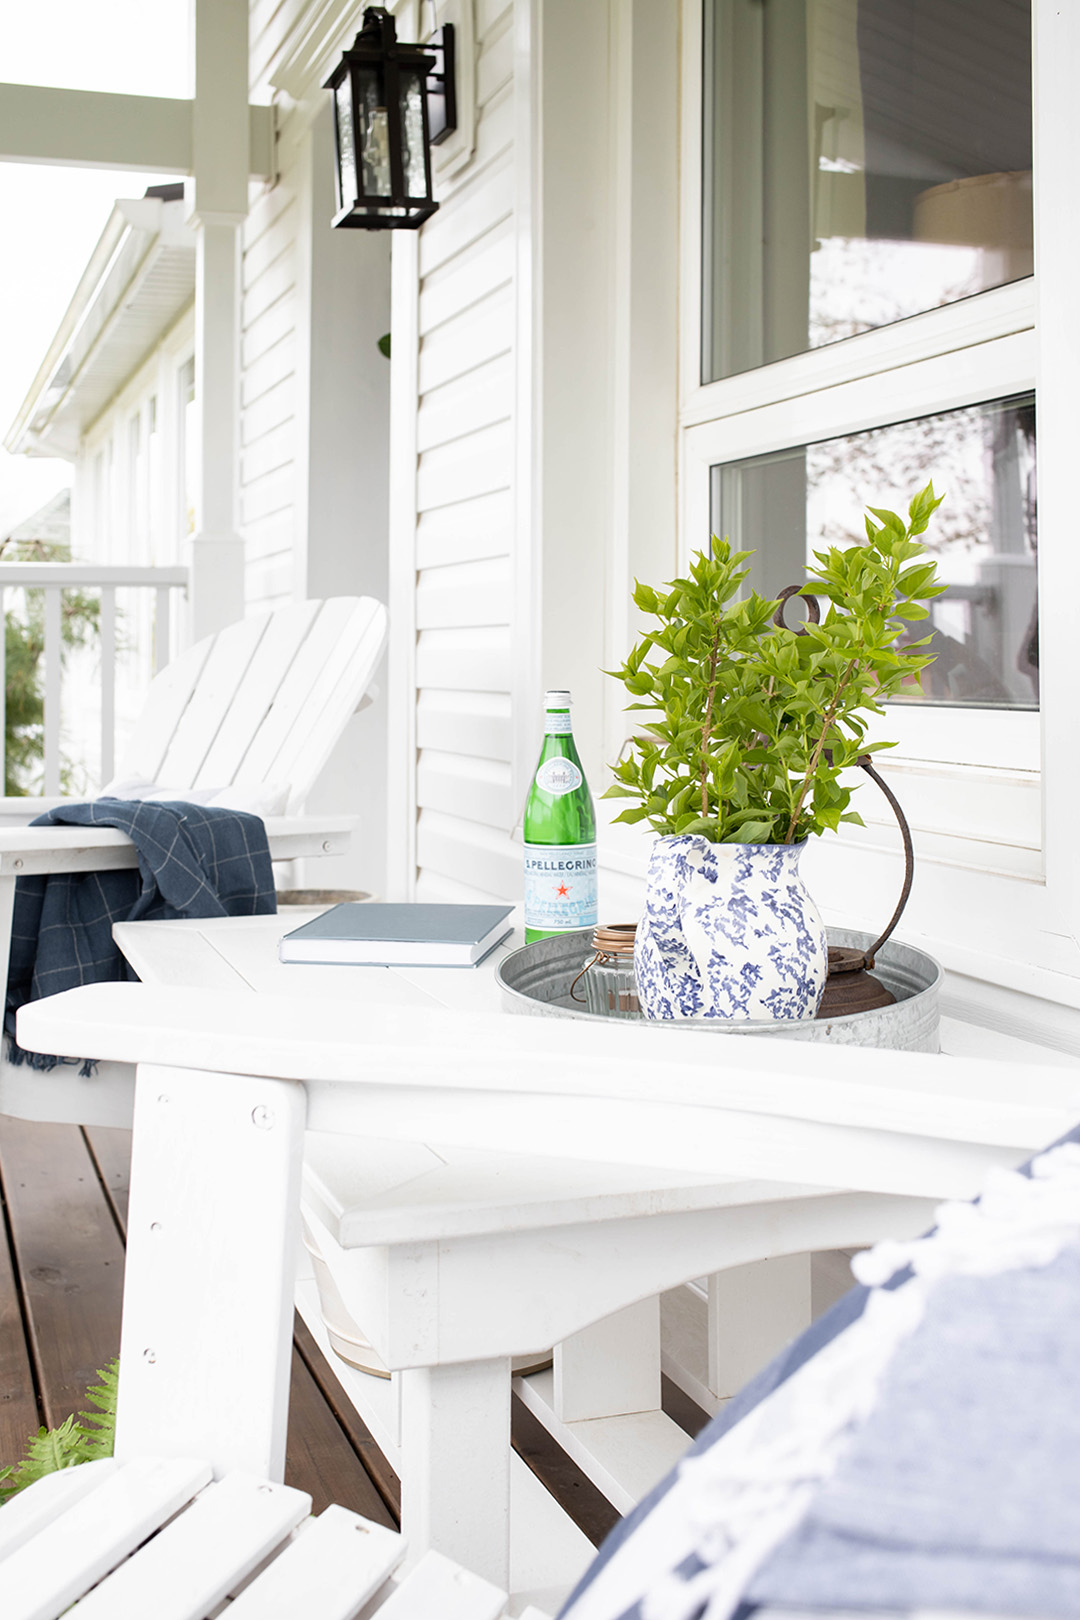 Just some thoughts on setting up an outdoor coffee table that's both pretty to look at and functional! These ideas should keep you from having to run out to your porch to bring everything in every single time it rains this summer!